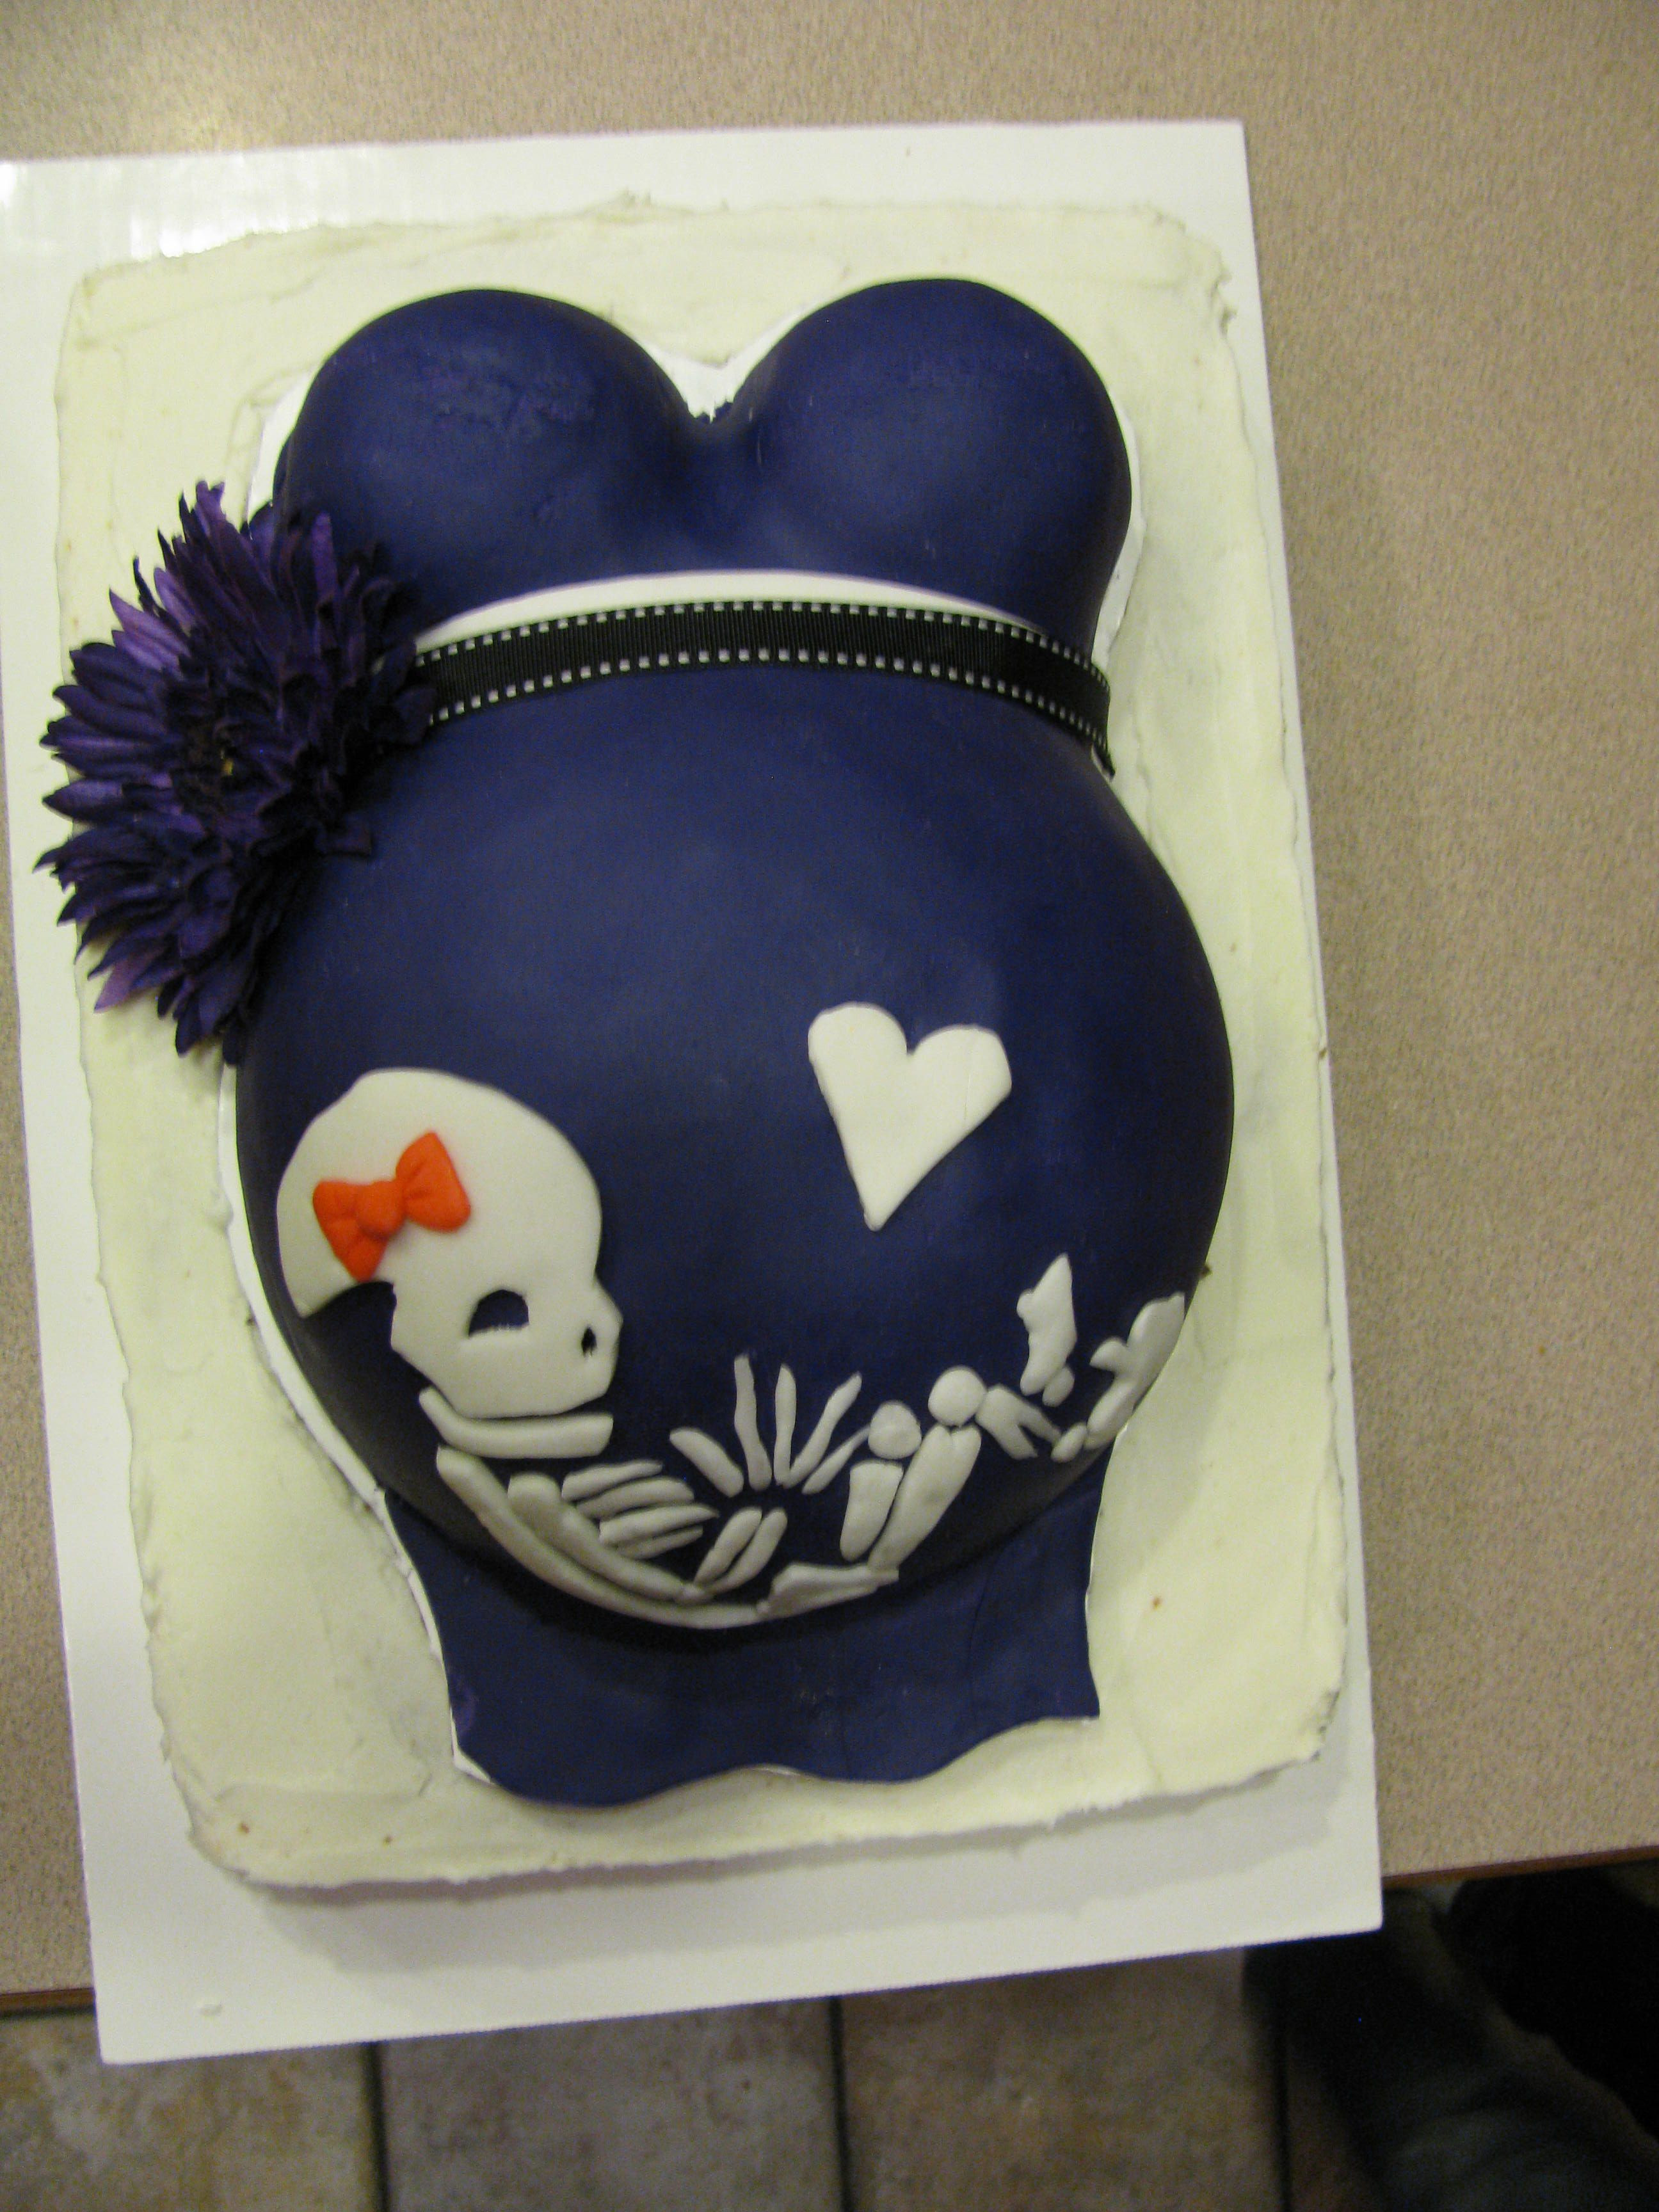 Halloween Baby Shower Cakes
 Belly Cake Halloween Baby shower cakes